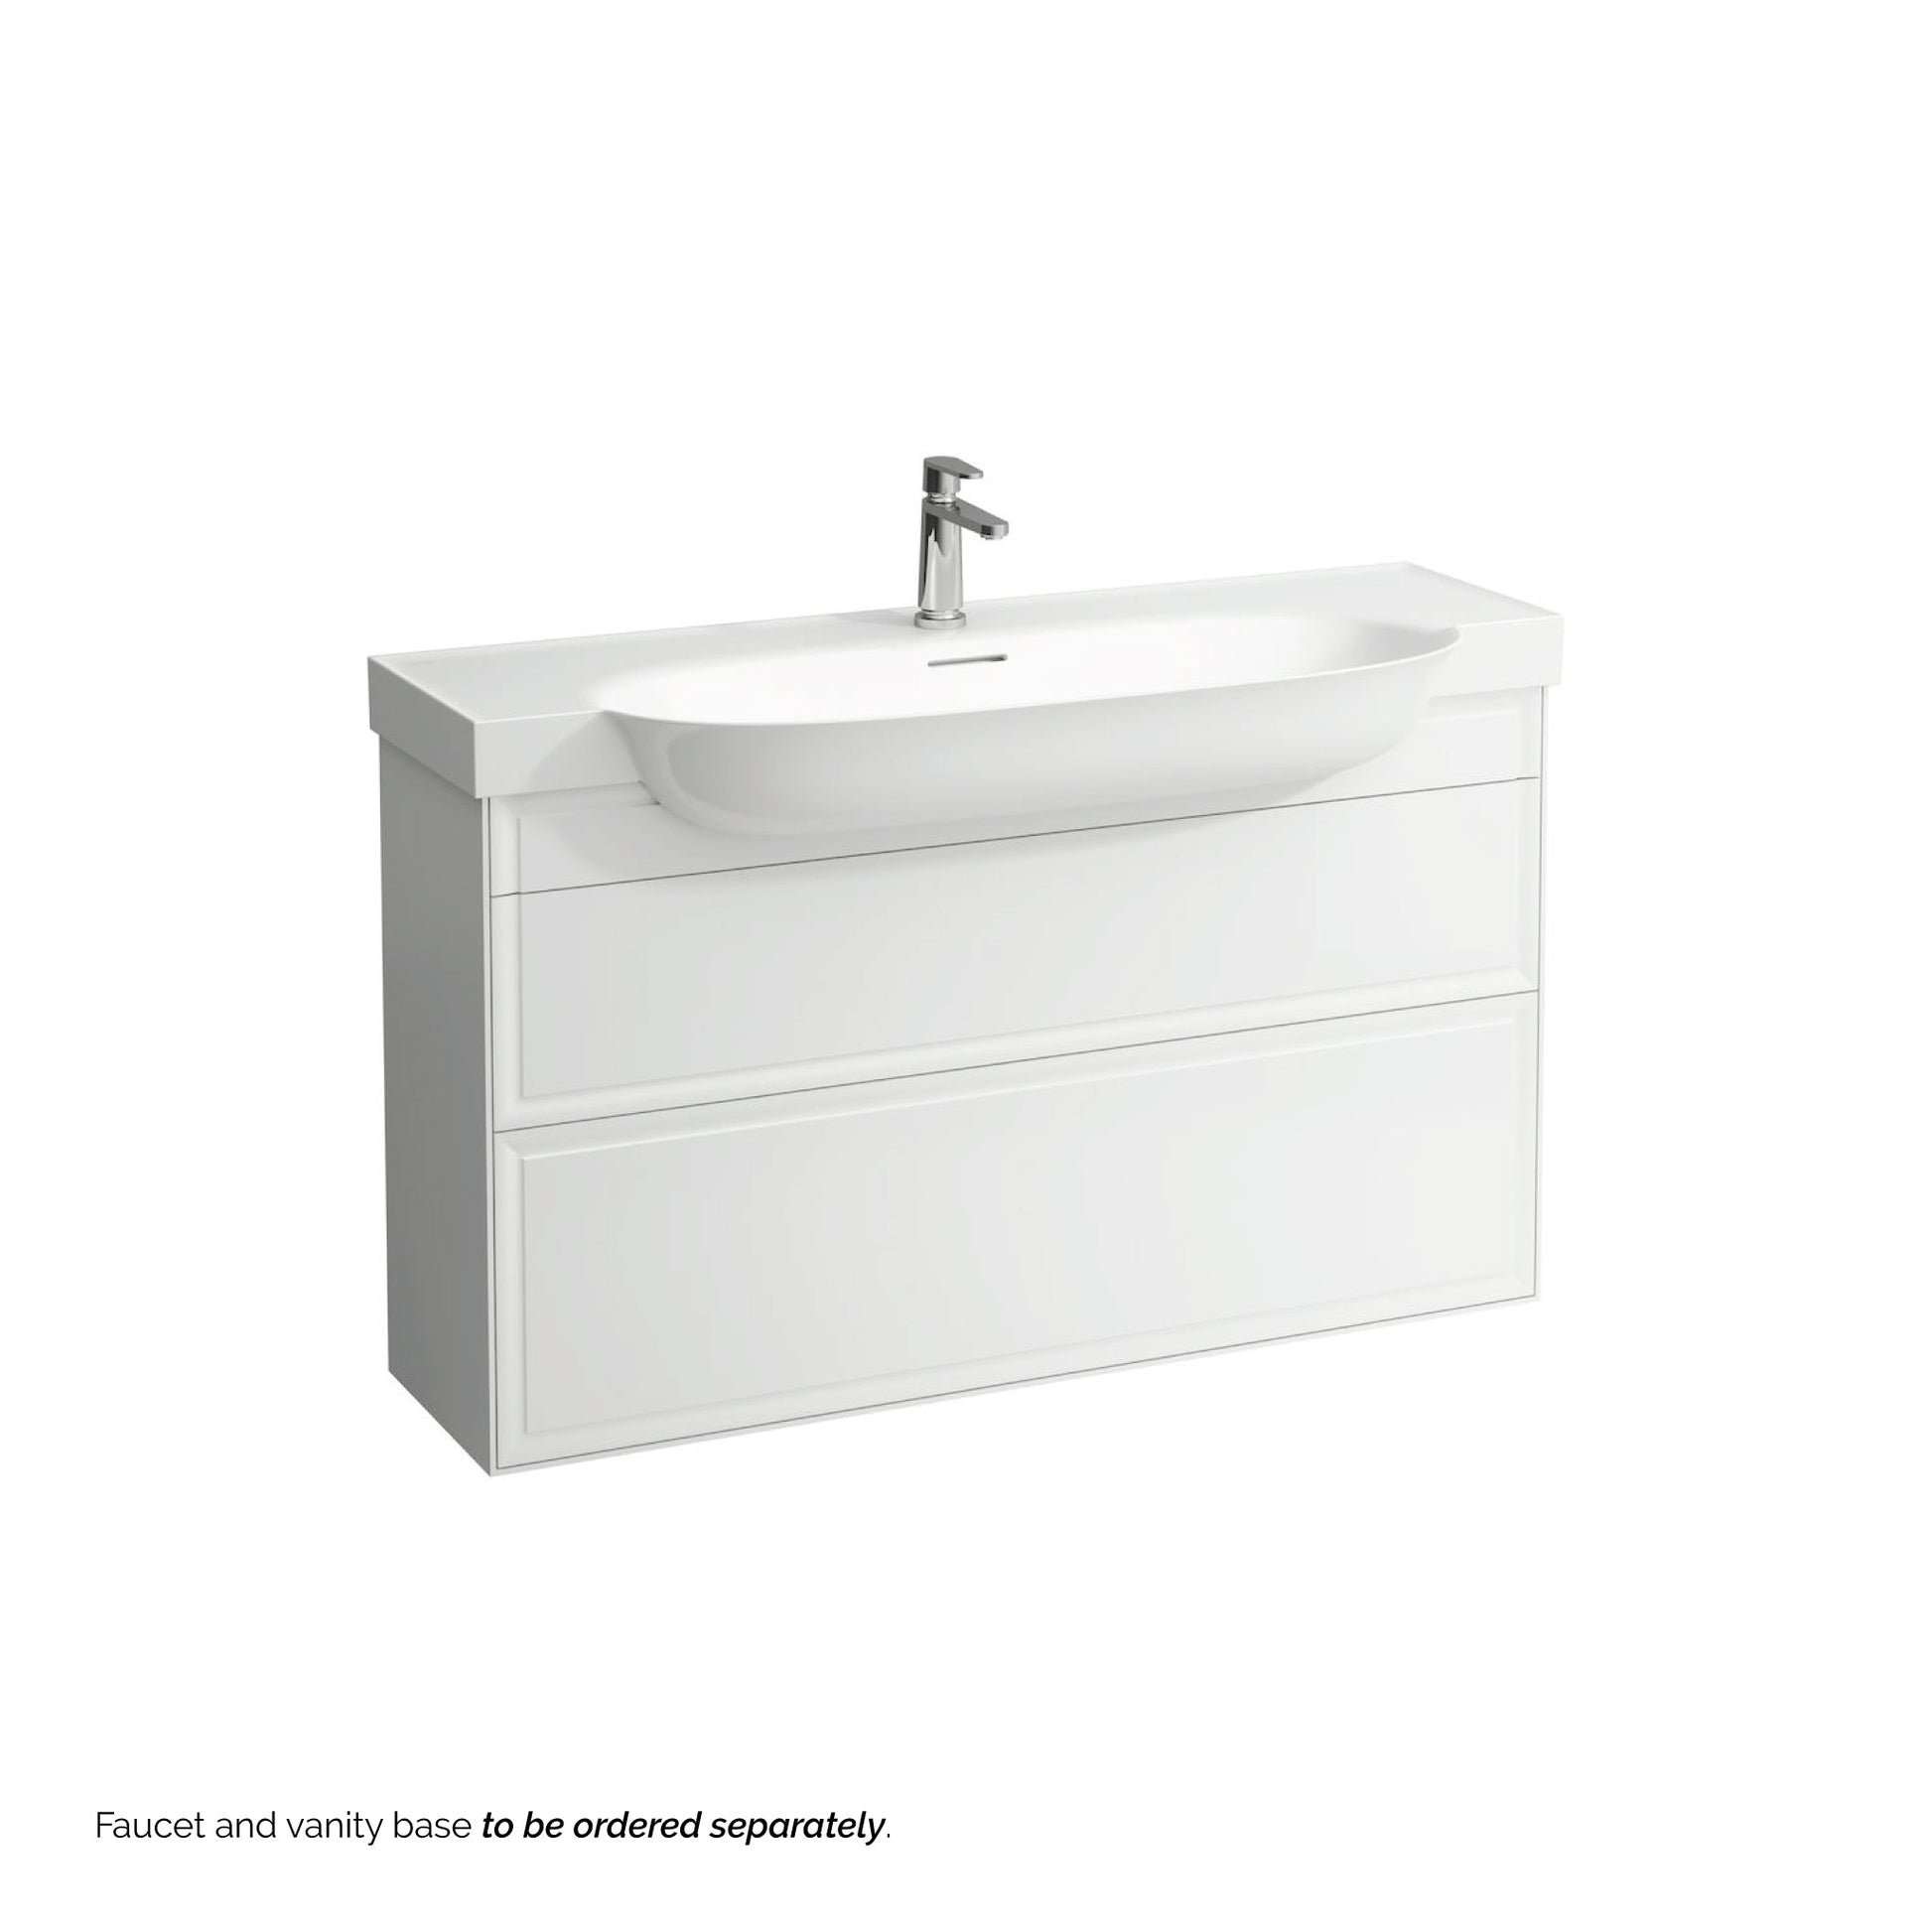 Laufen New Classic 47" x 19" Matte White Ceramic Wall-Mounted Bathroom Sink With Faucet Hole